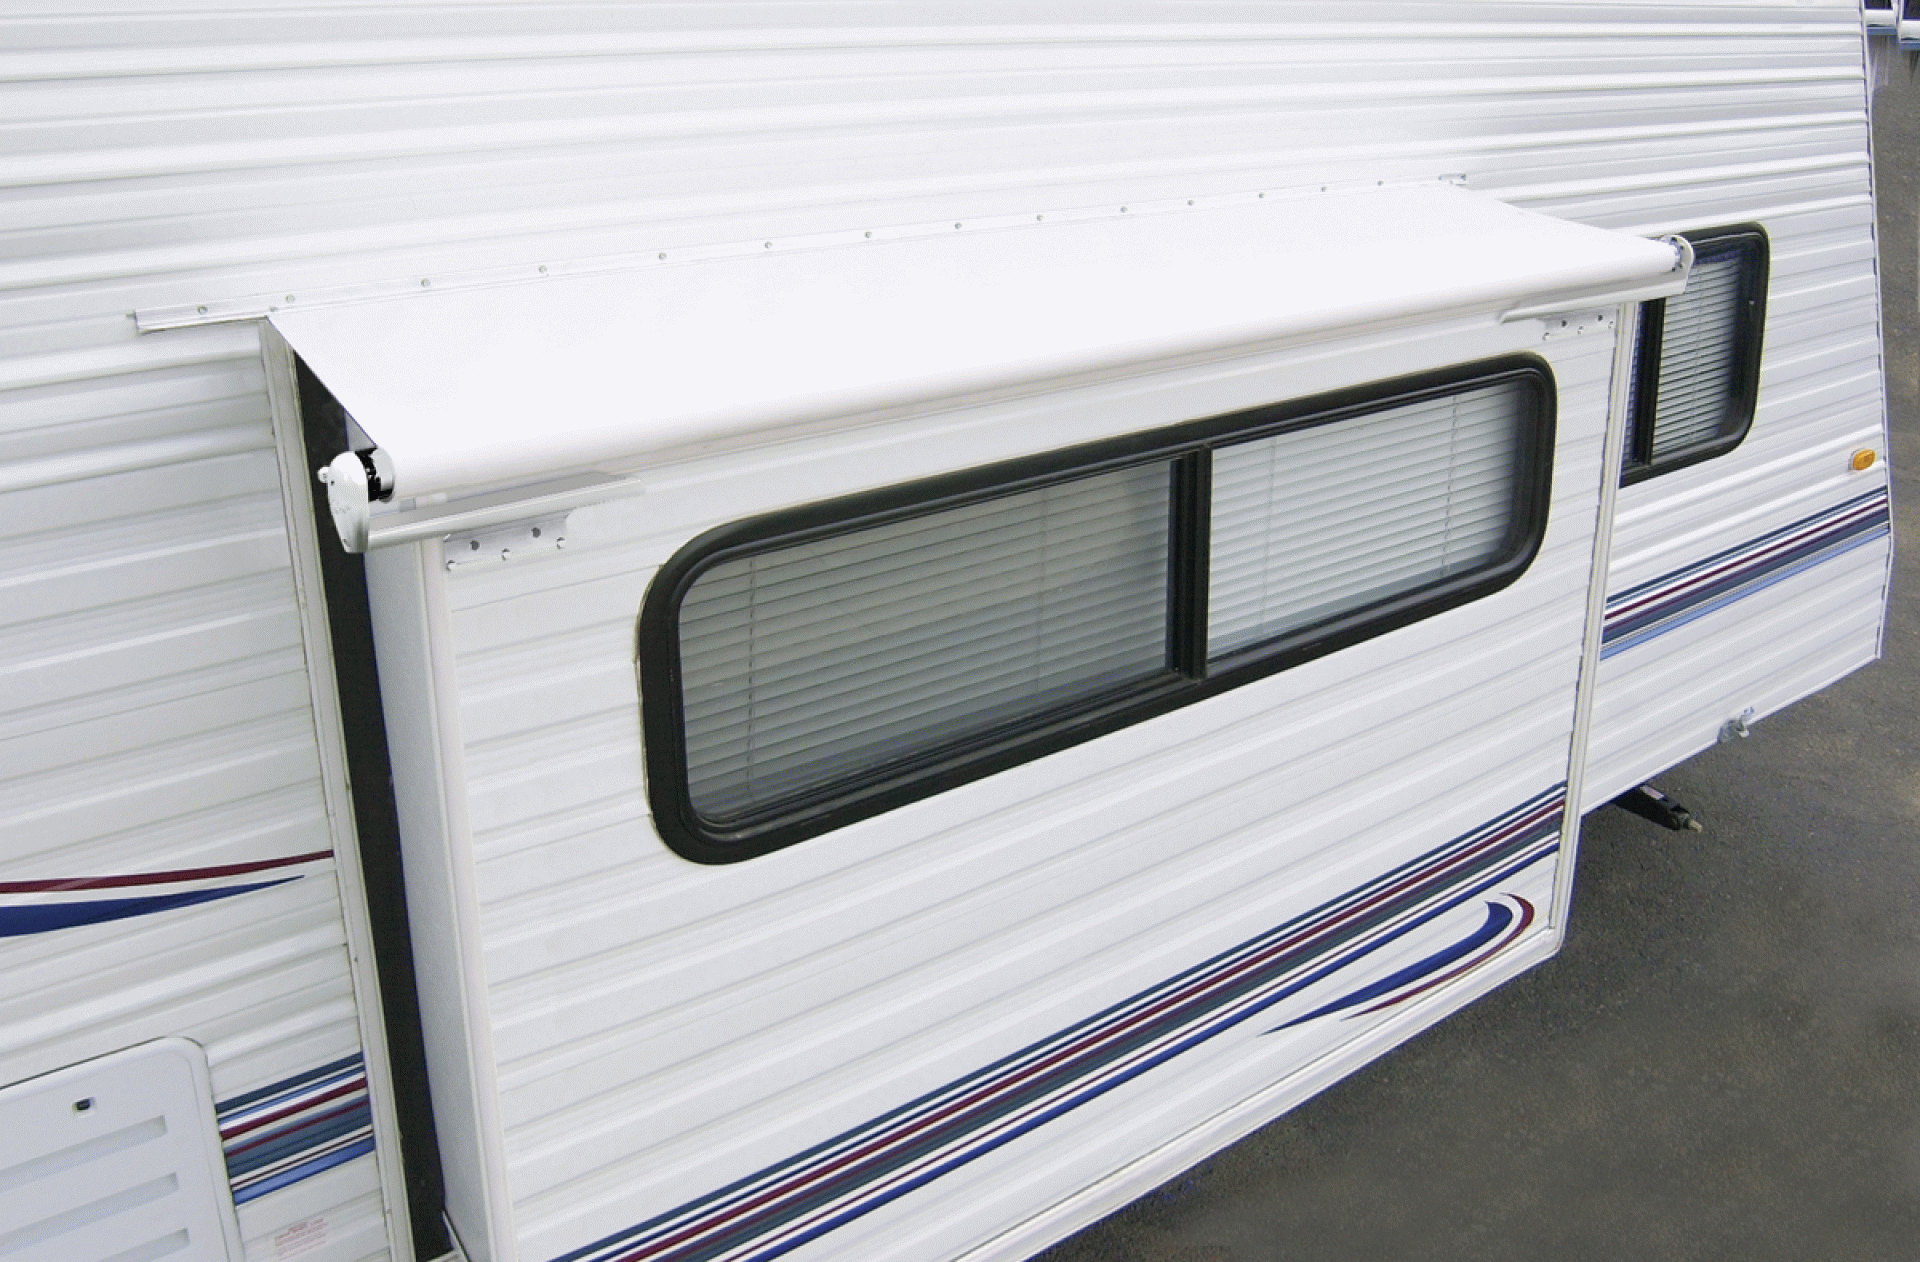 CAREFREE OF COLORADO | LH1536242 | Slideout Cover Awning 146" - 153.9" Roof Range Solid Black Vinyl